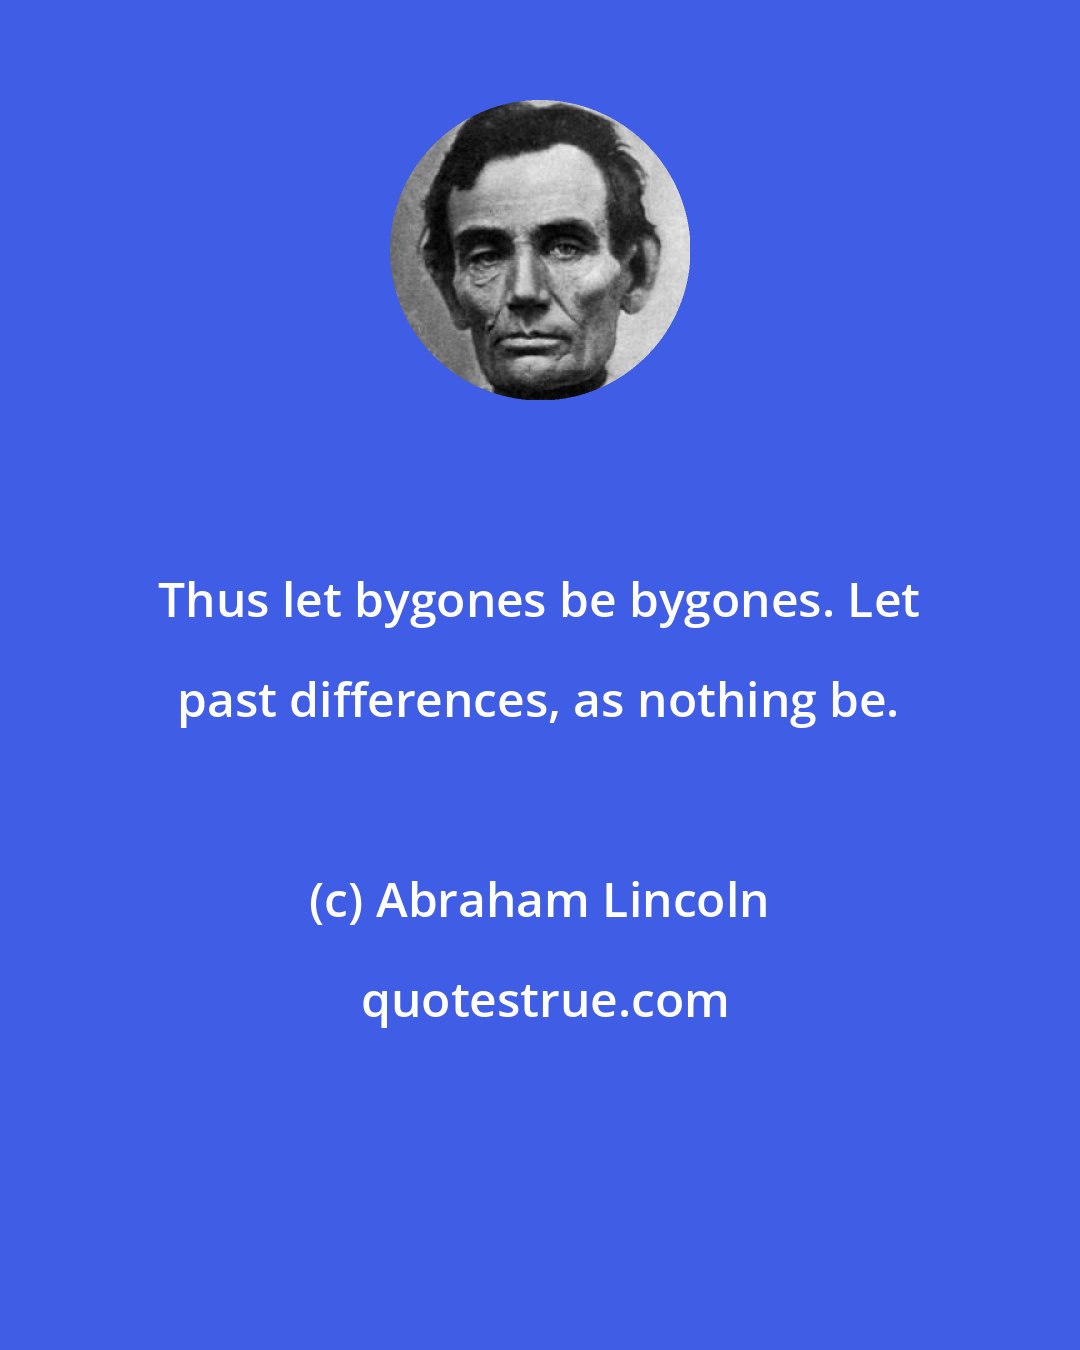 Abraham Lincoln: Thus let bygones be bygones. Let past differences, as nothing be.